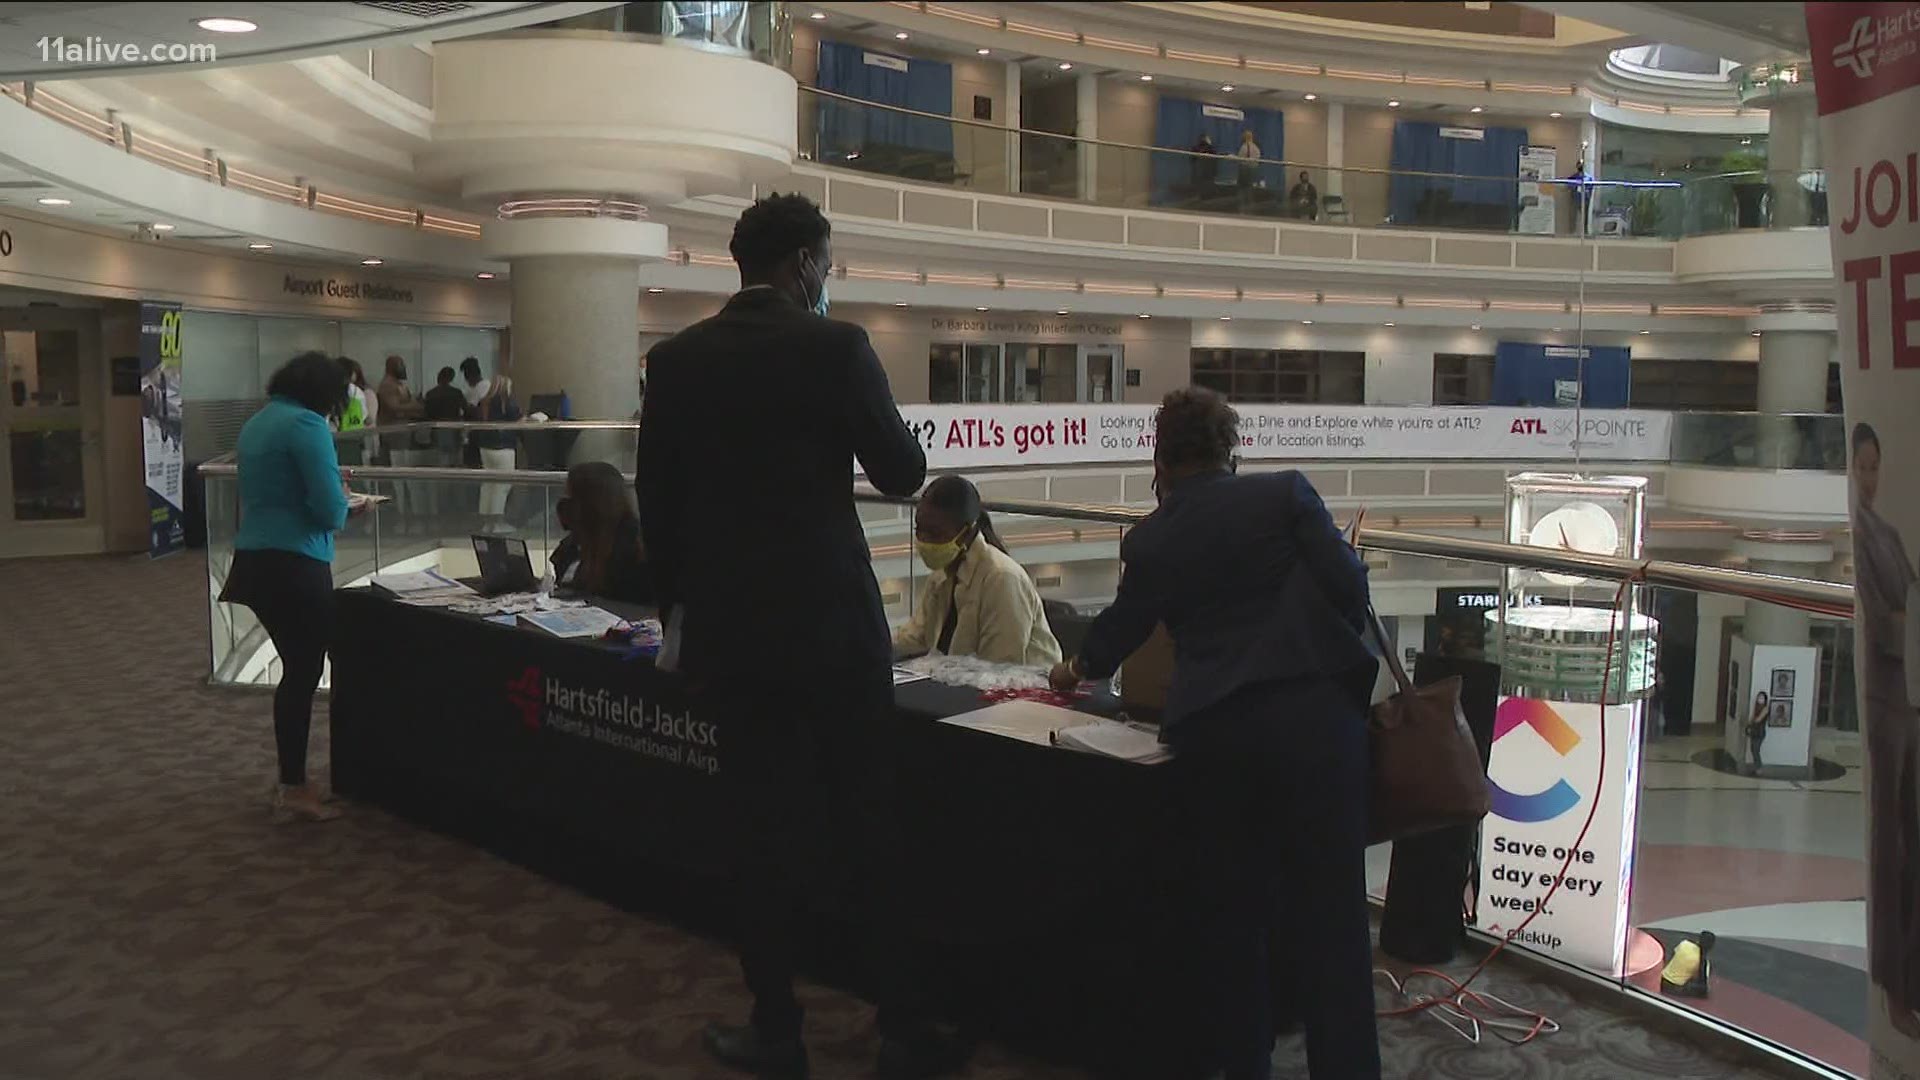 Hartsfield-Jackson International Airport is hoping to fill 3,000 positions.